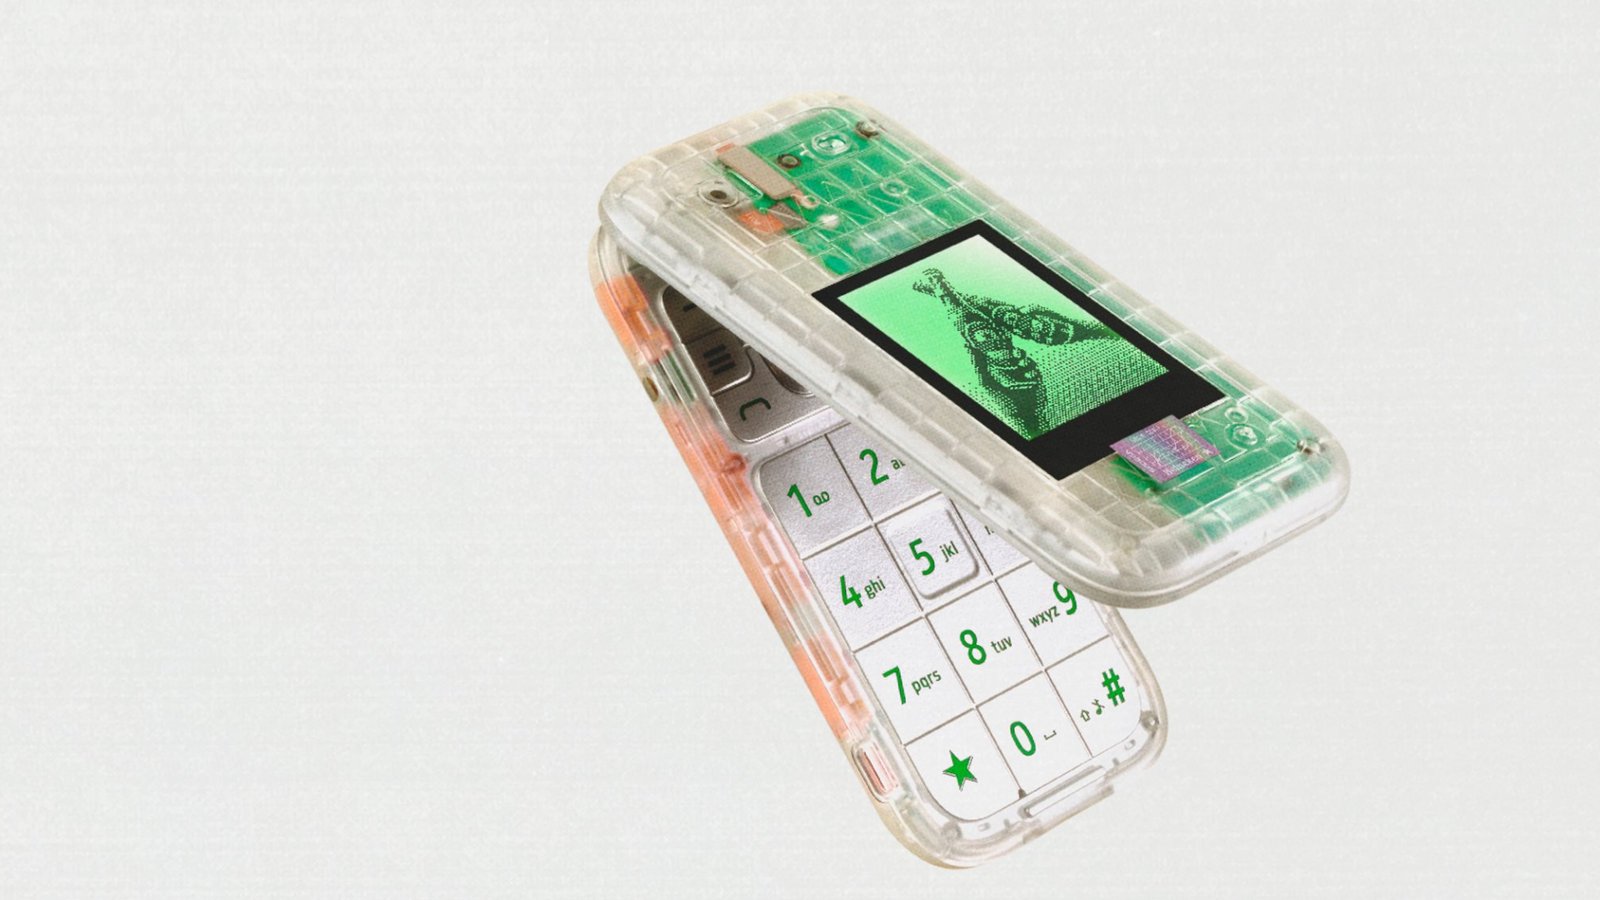 The Boring Phone is a featureless, transparent flip handset that takes me back to my childhood